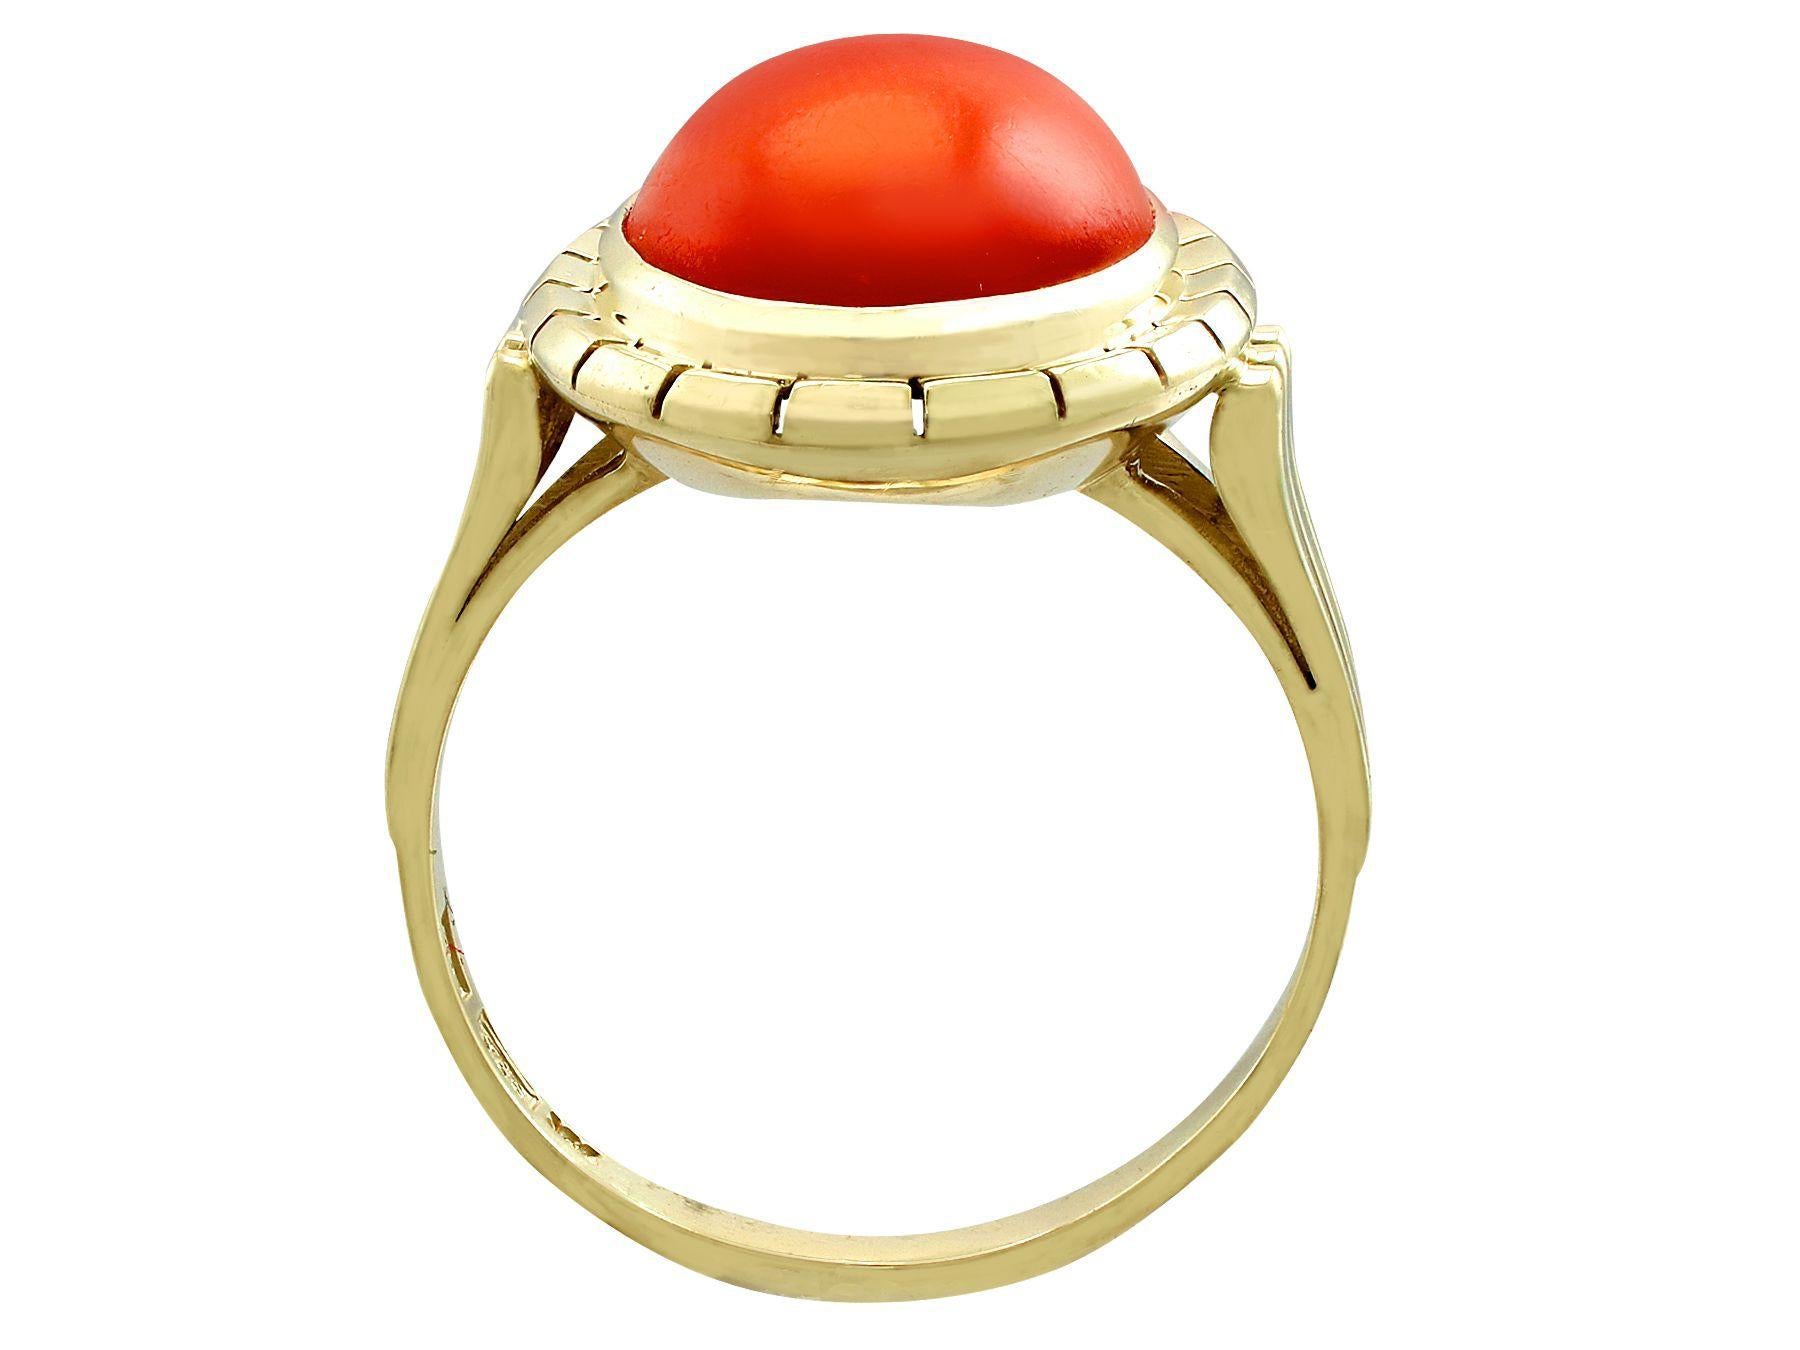 Women's or Men's Vintage 1940s 4.84 Carat Cabochon Cut Coral and Yellow Gold Cocktail Ring For Sale